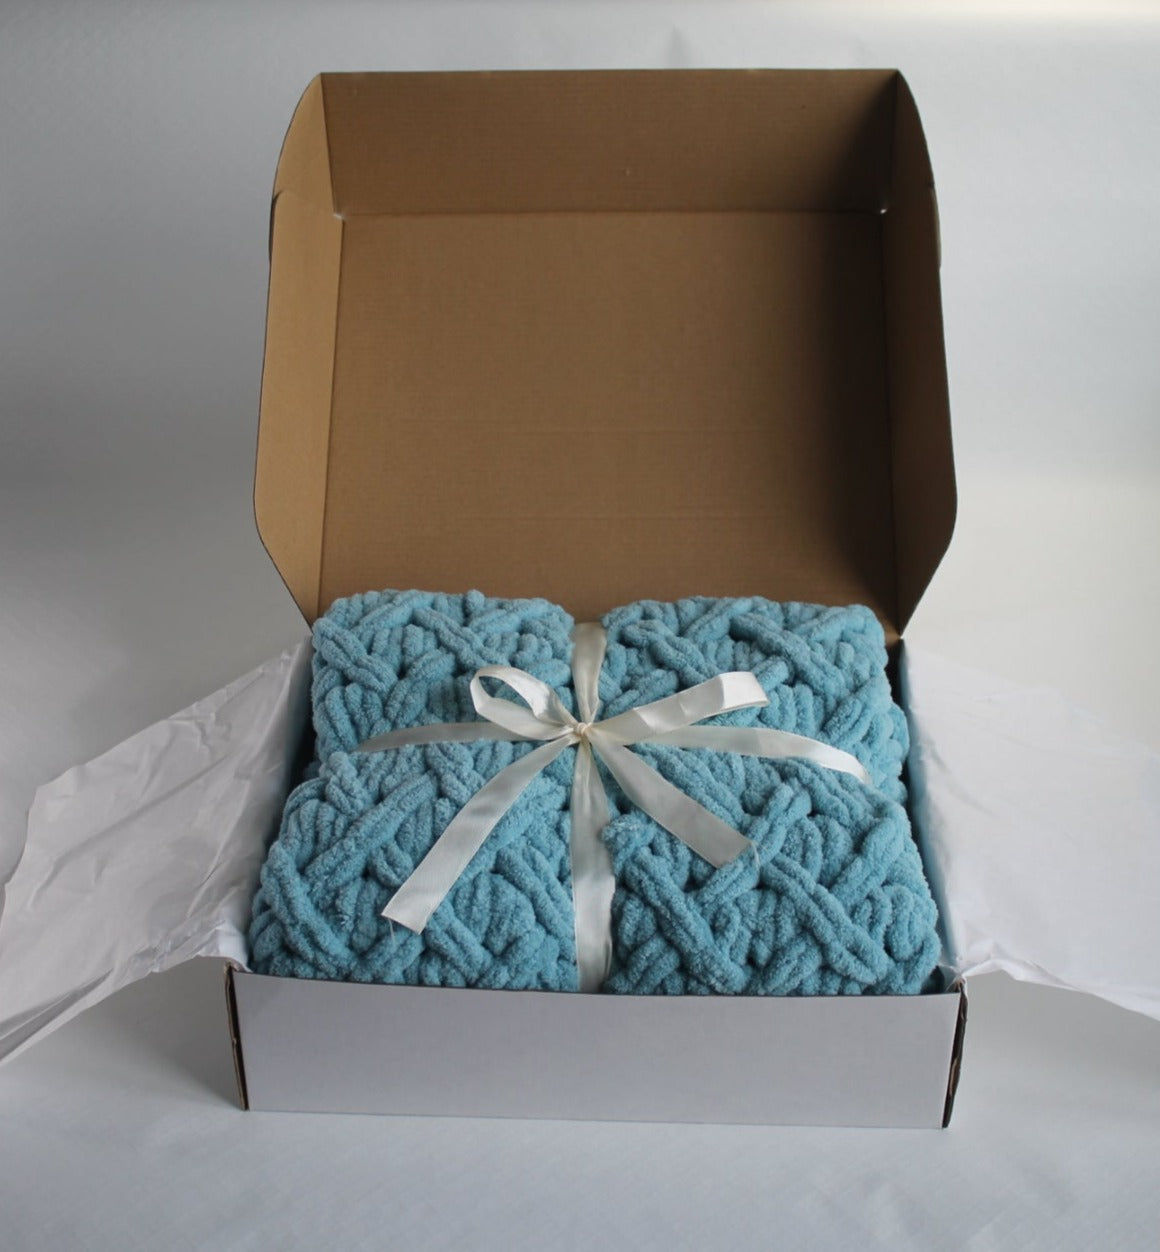 Baby plush blanket in the color of blue with shades of gray